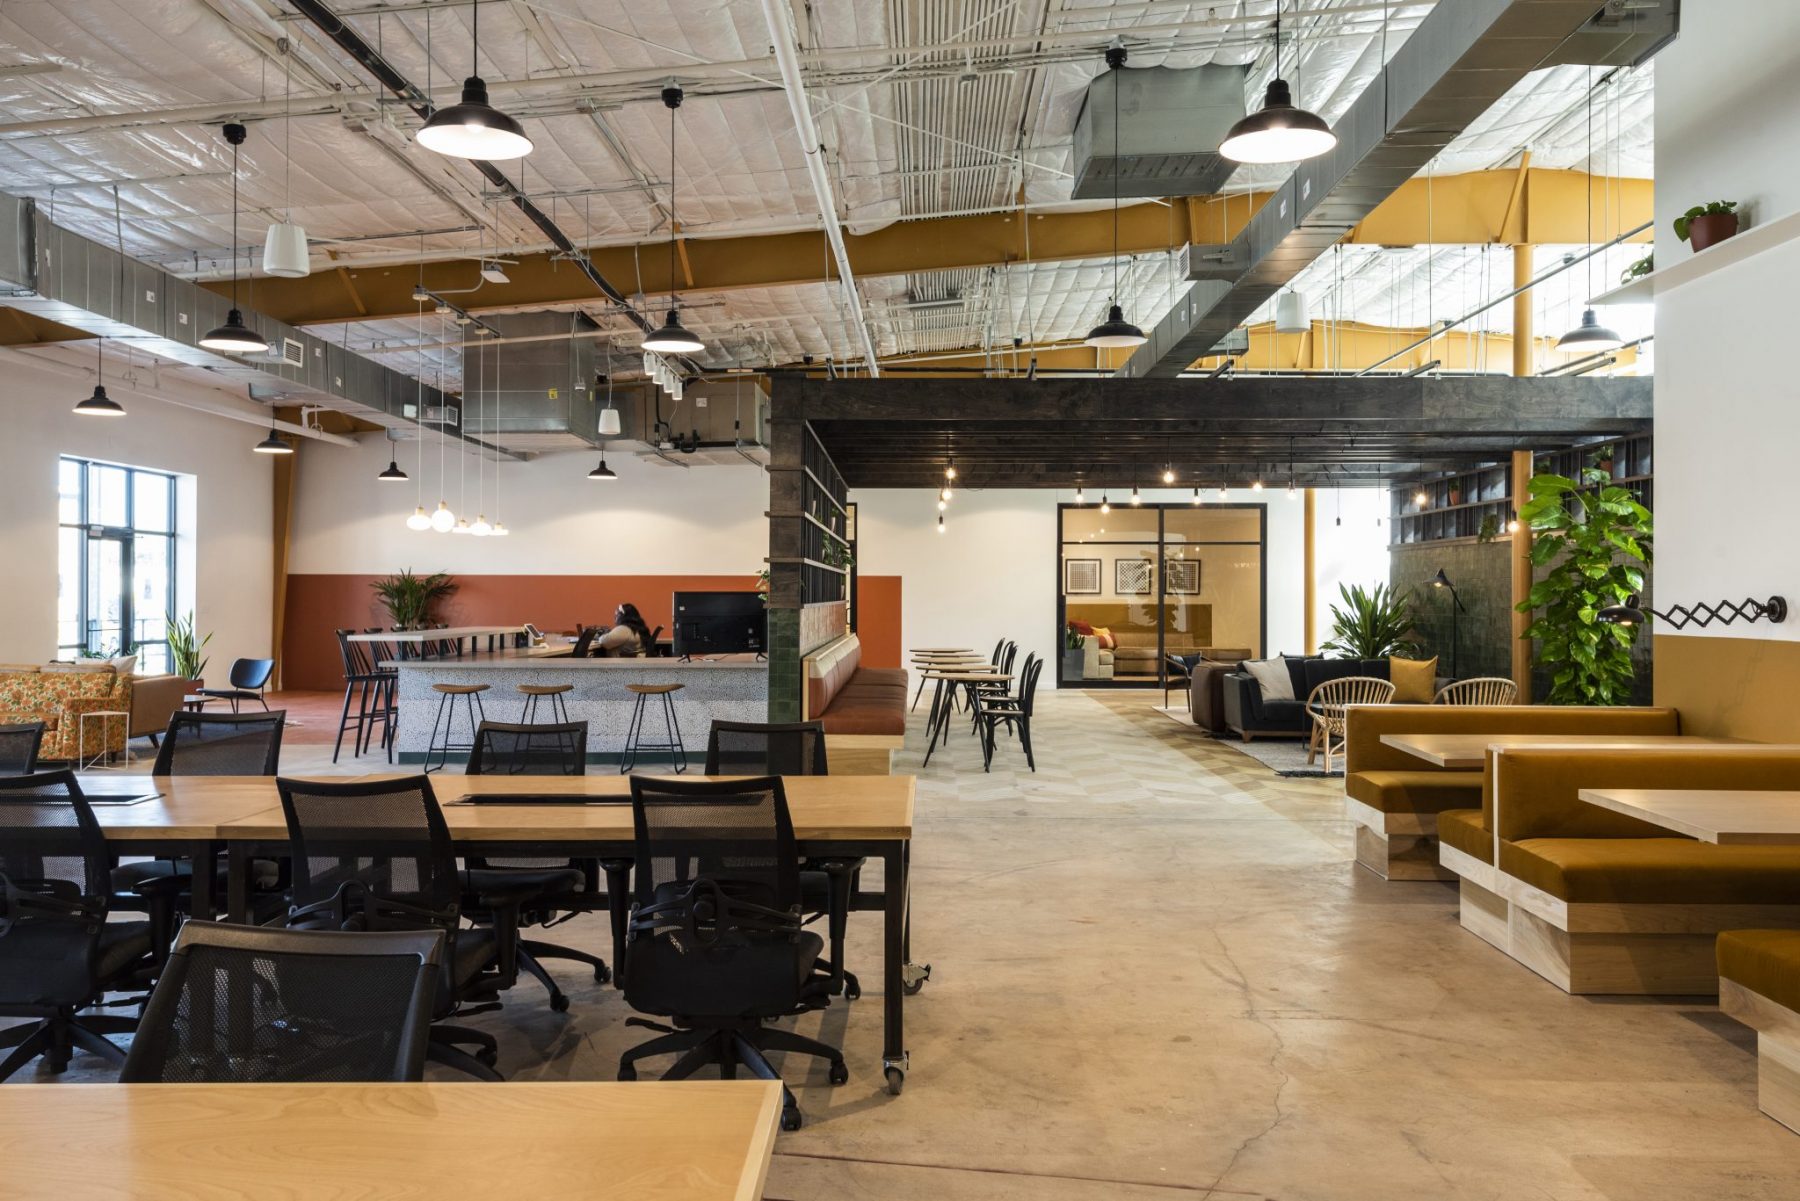 Flexible shared work areas